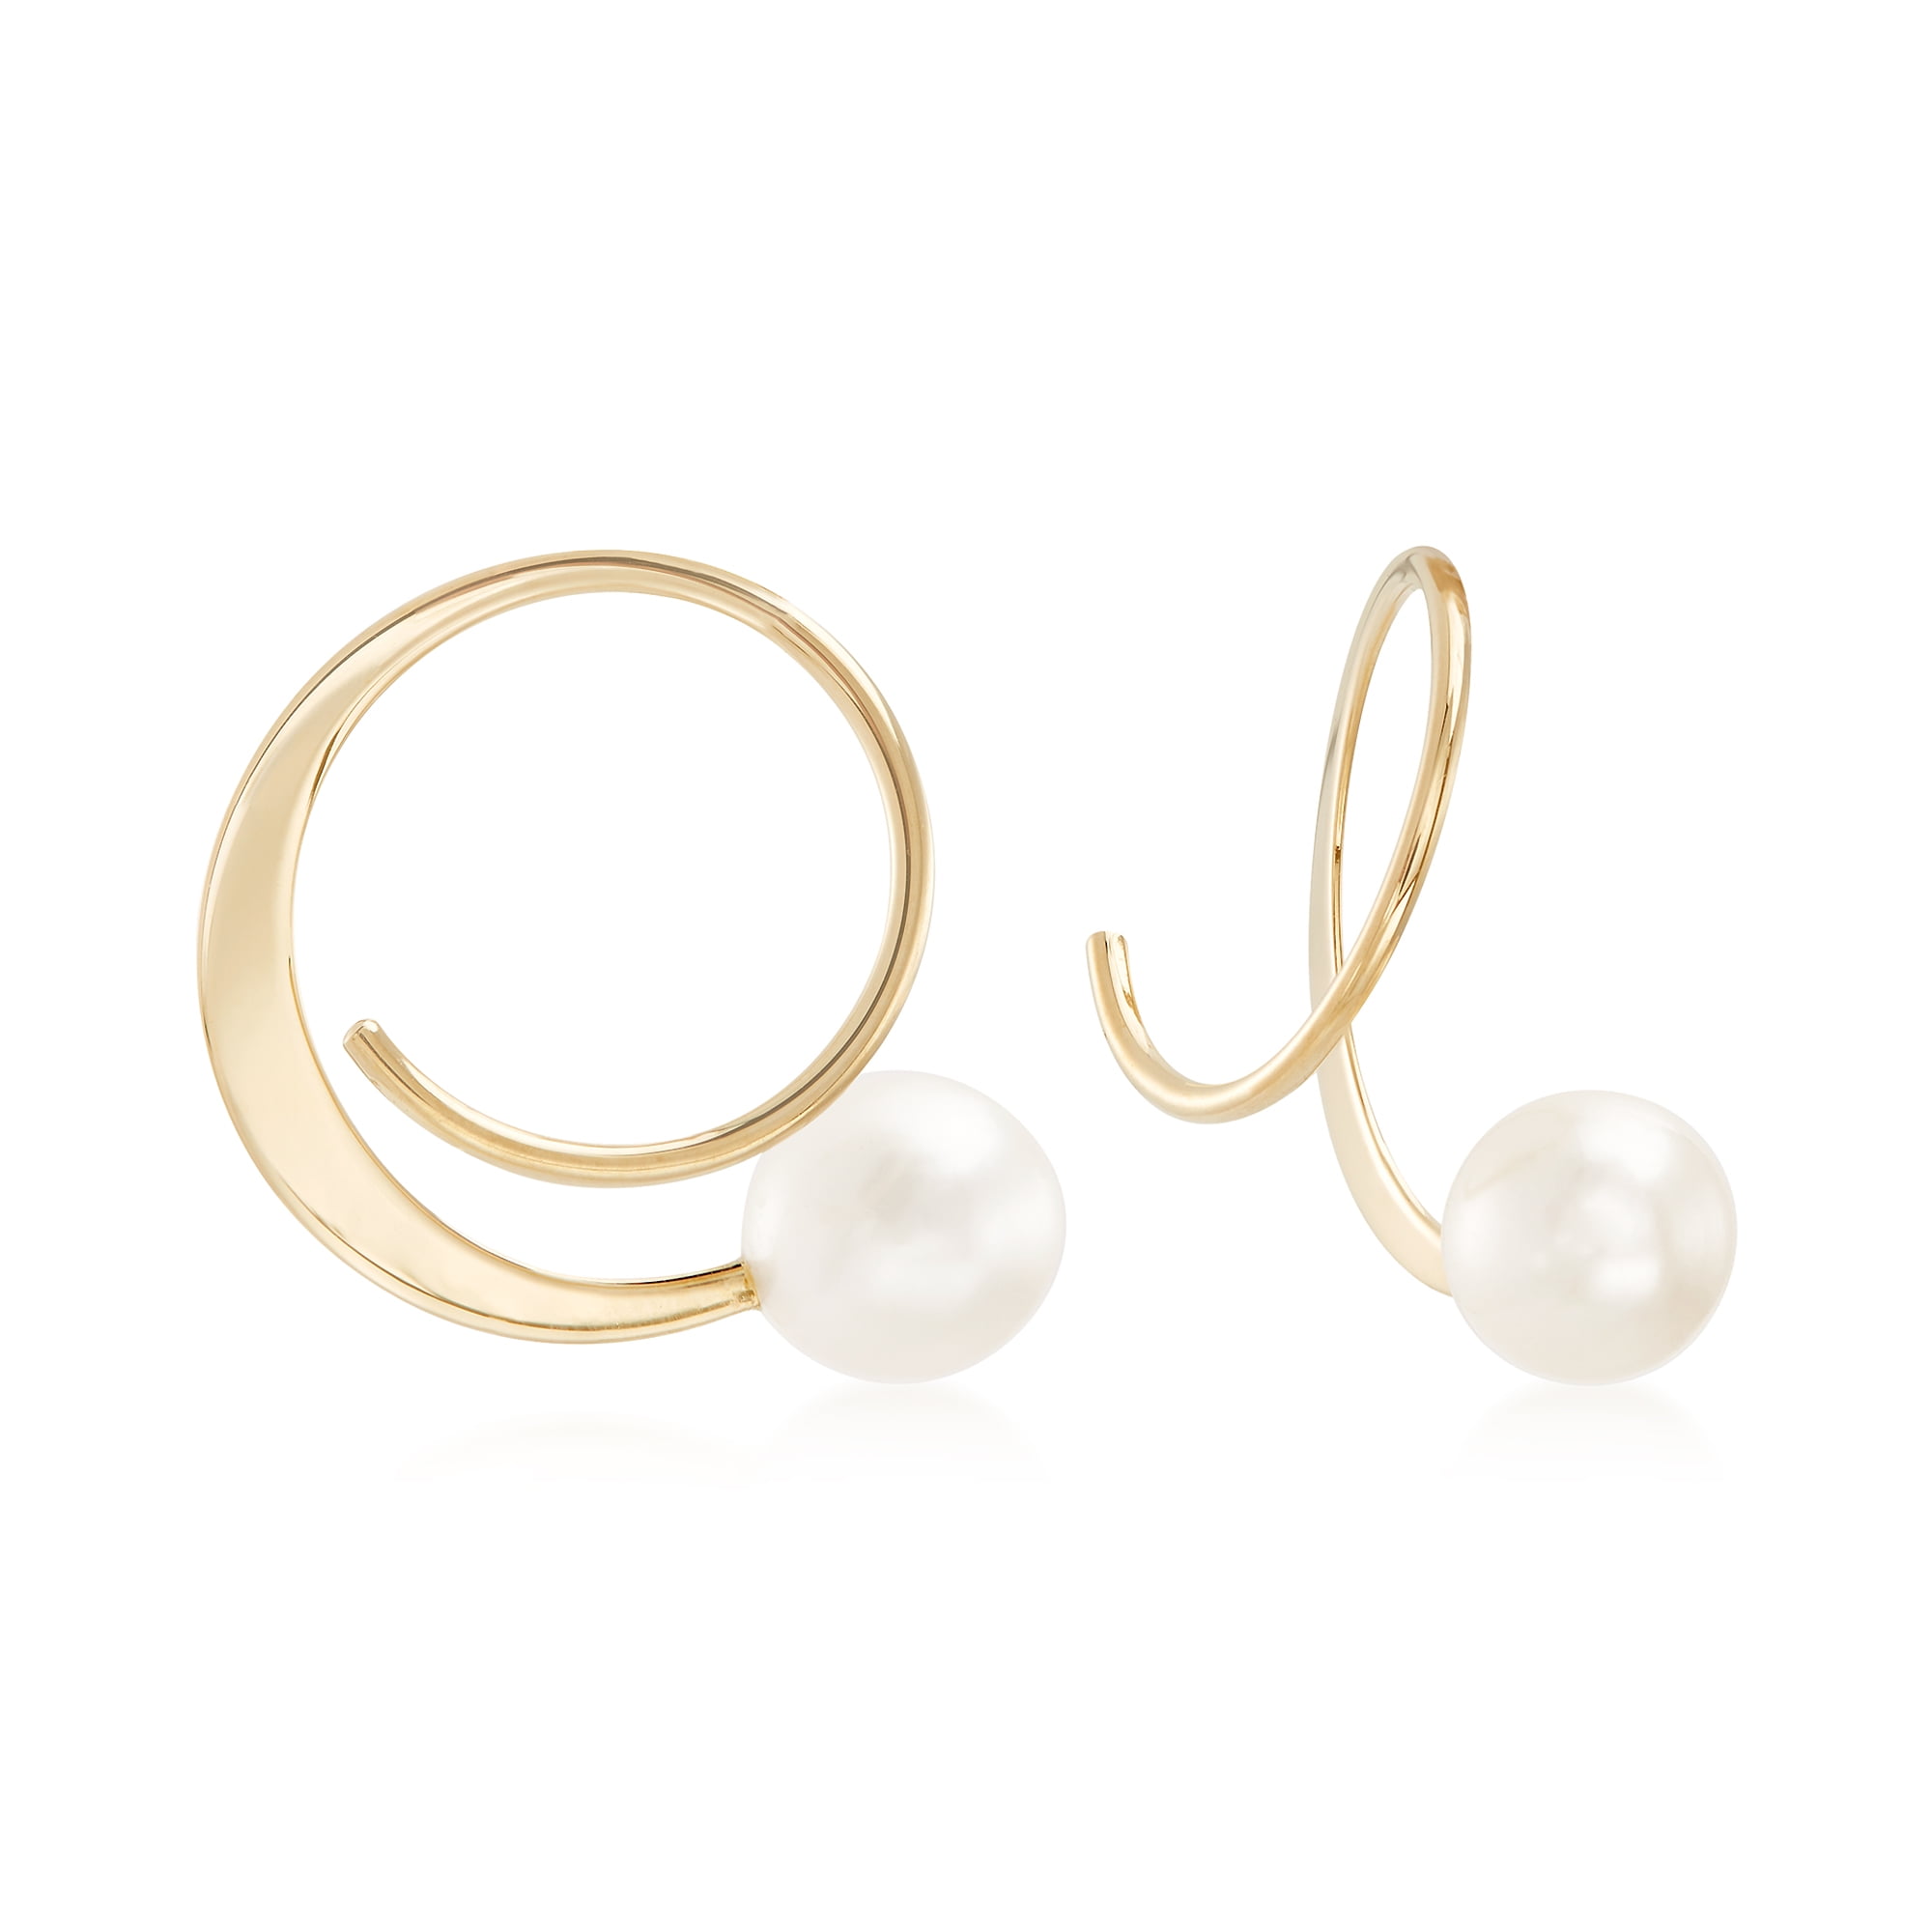 Spiral Wire White Freshwater Cultured Pearl Cartilage Ear Cuff Wrap Helix Earrings 14K Gold Plated Sterling Silver Bling Jewelry PFS-32-2625 